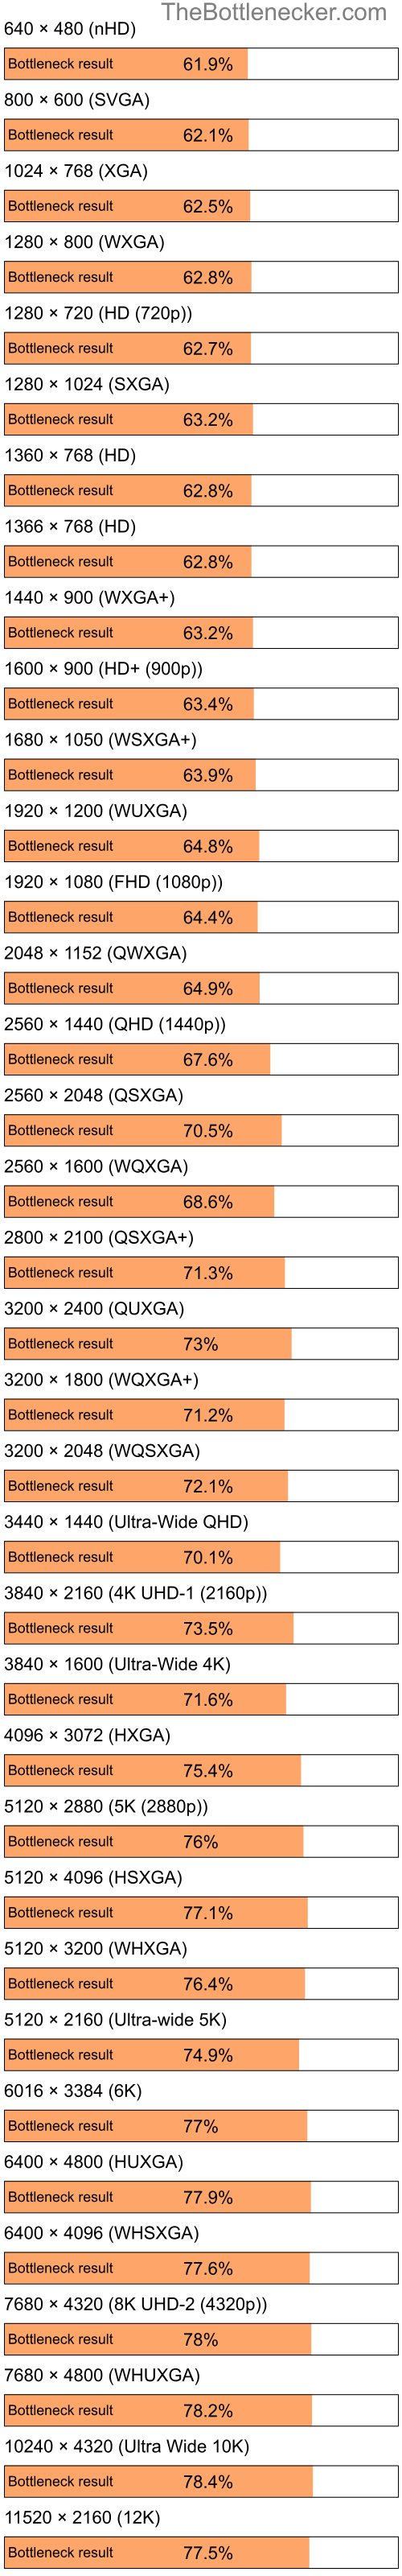 Bottleneck results by resolution for Intel Pentium 4 and AMD Radeon X700 PRO in General Tasks